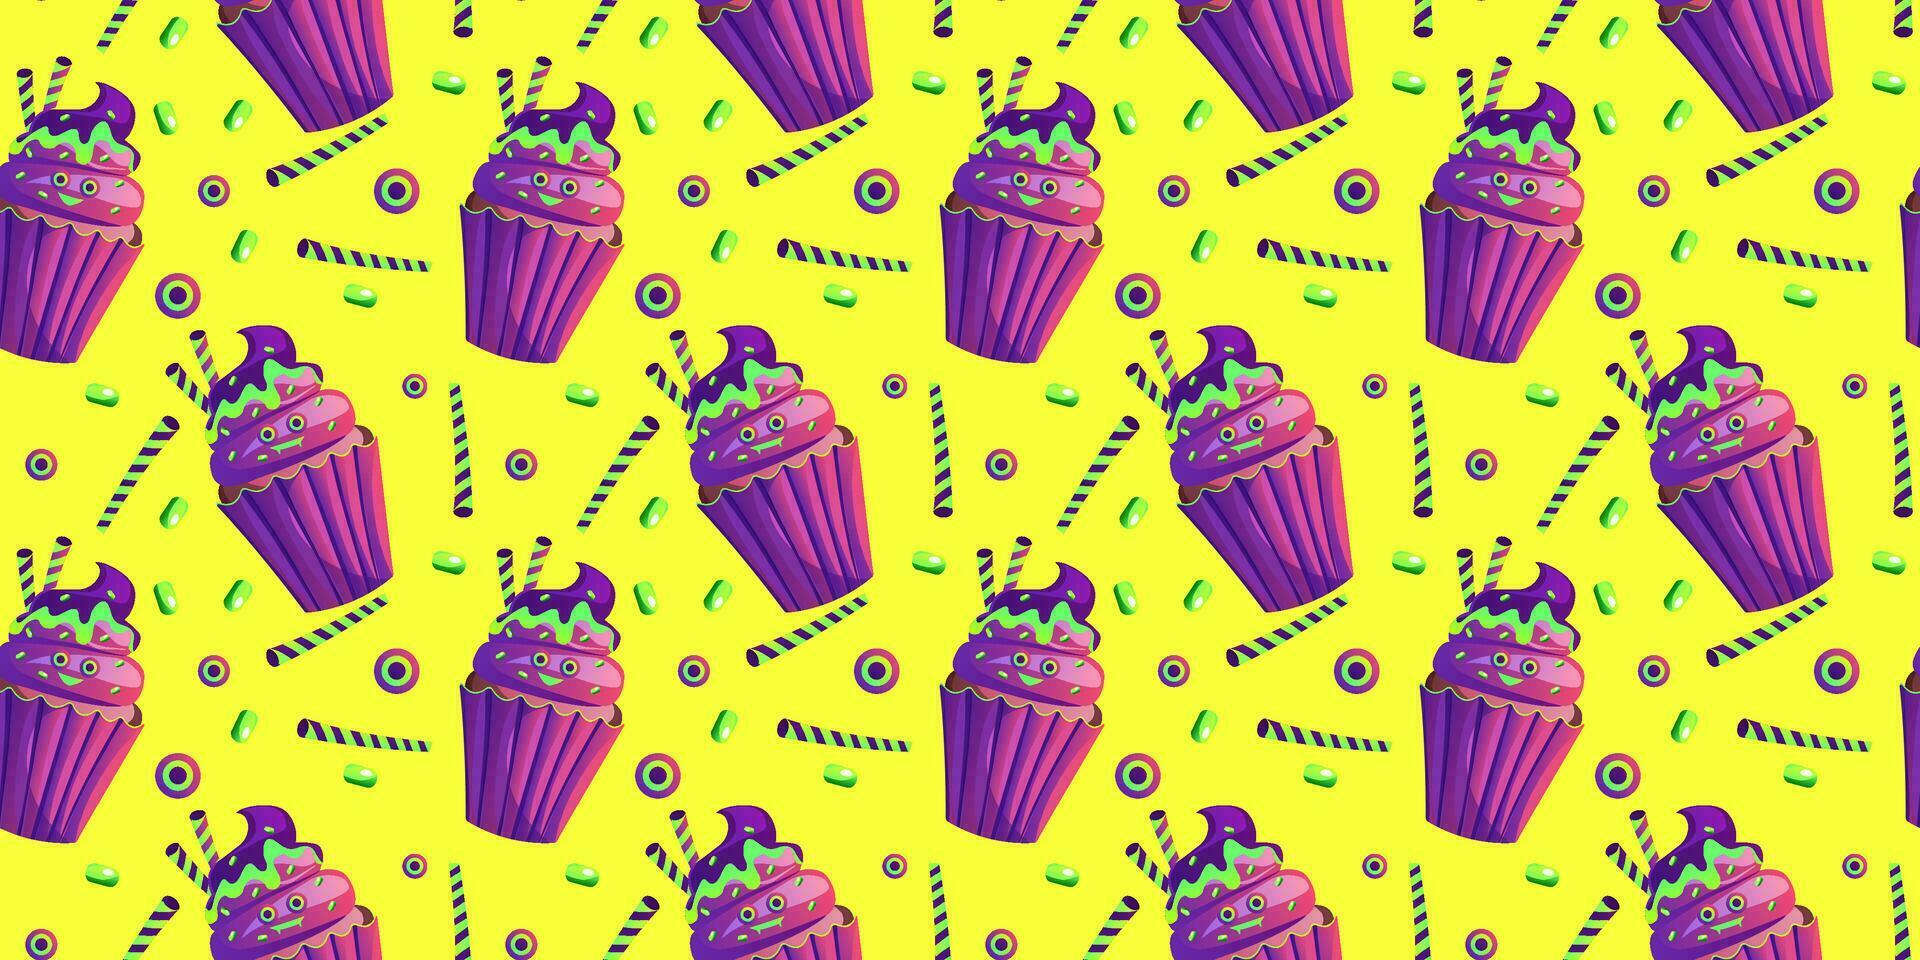 Monster cupcake seamless pattern for Halloween. Vector. can be used to create spooky and fun designs for Halloween-themed decorations, party invitations, treat bags vector